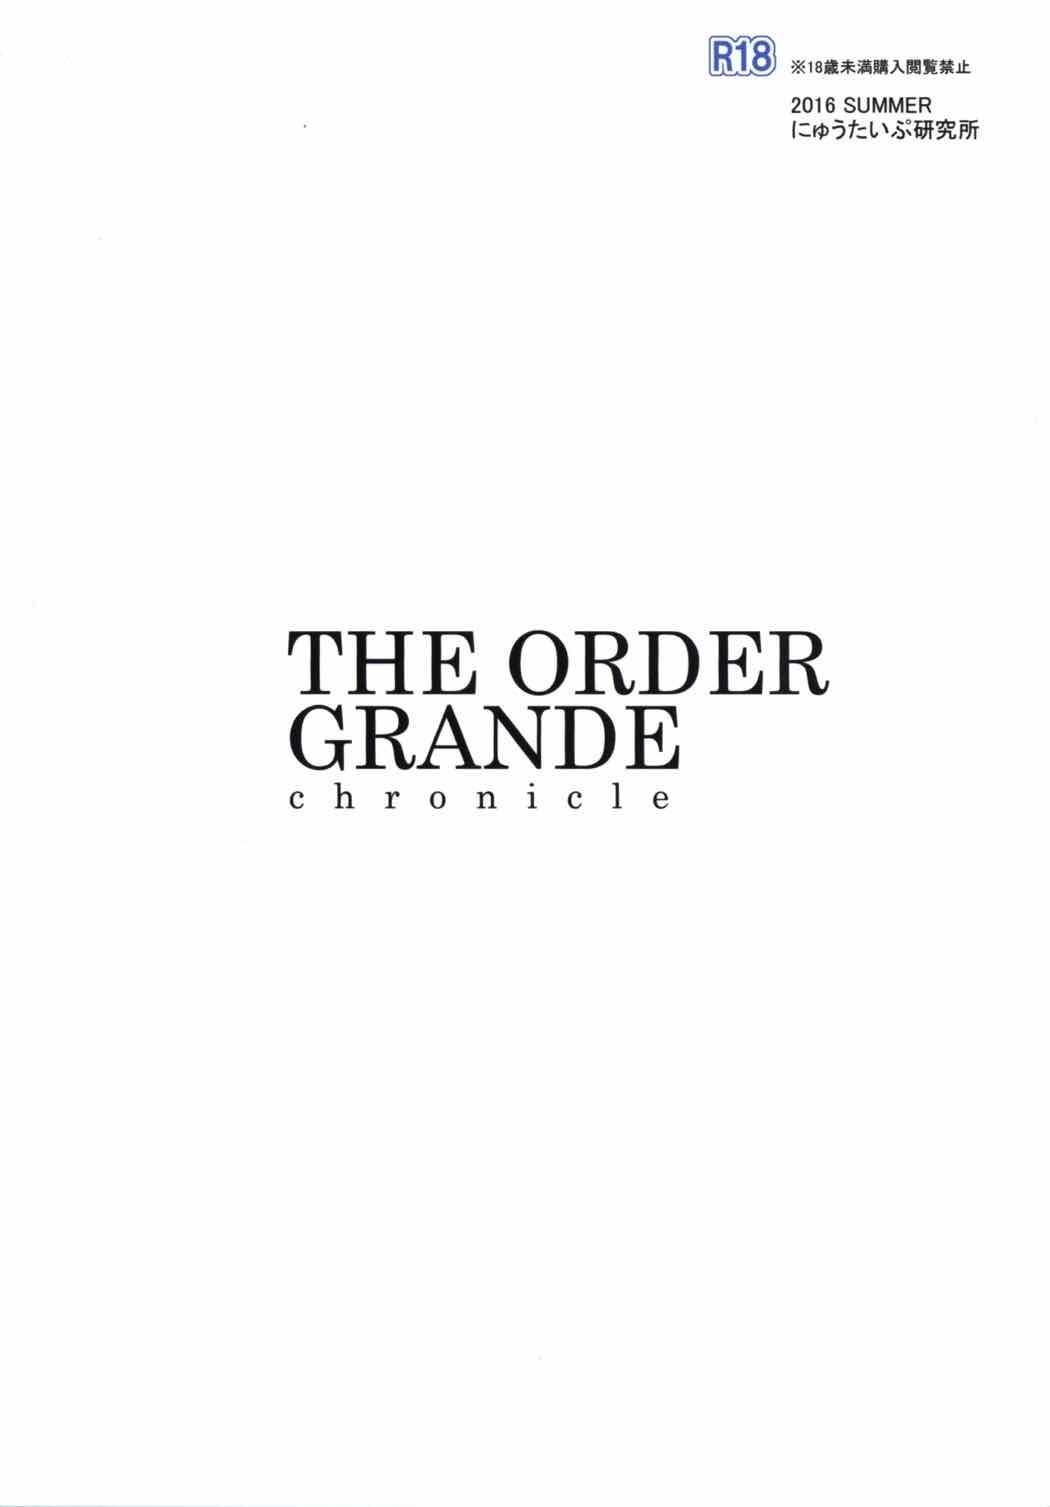 THE ORDER GRANDE chronicle 25